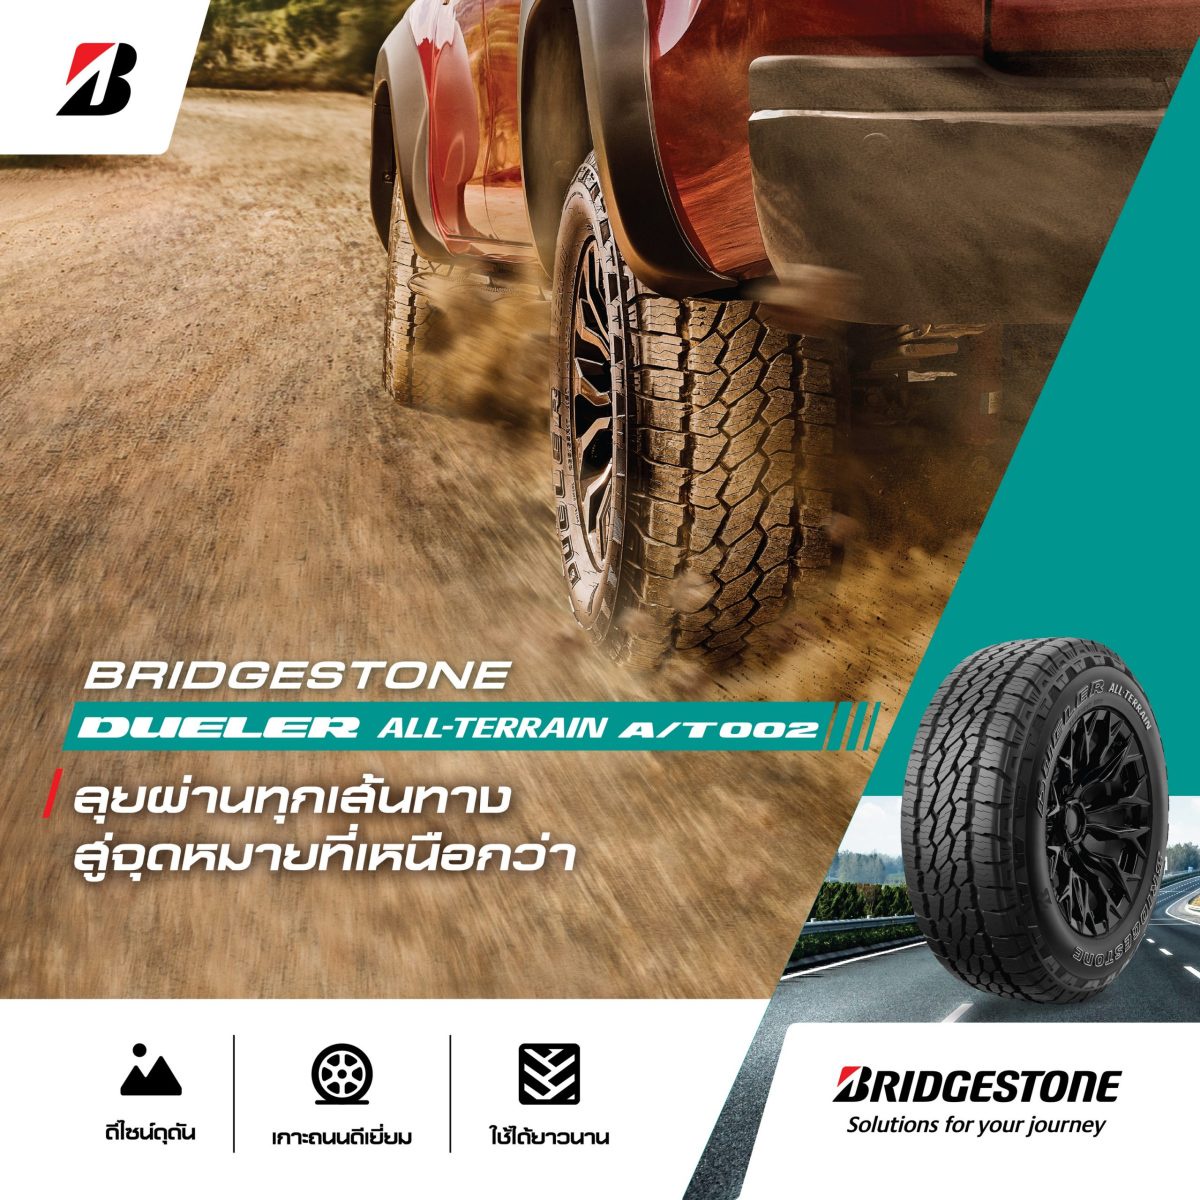 Bridgestone Delivers Utmost High-Performance Driving Experience On-Road Off-Road with Premium All-Terrain Tire, BRIDGESTONE DUELER ALL-TERRAIN A/T002 in 10 Sizes